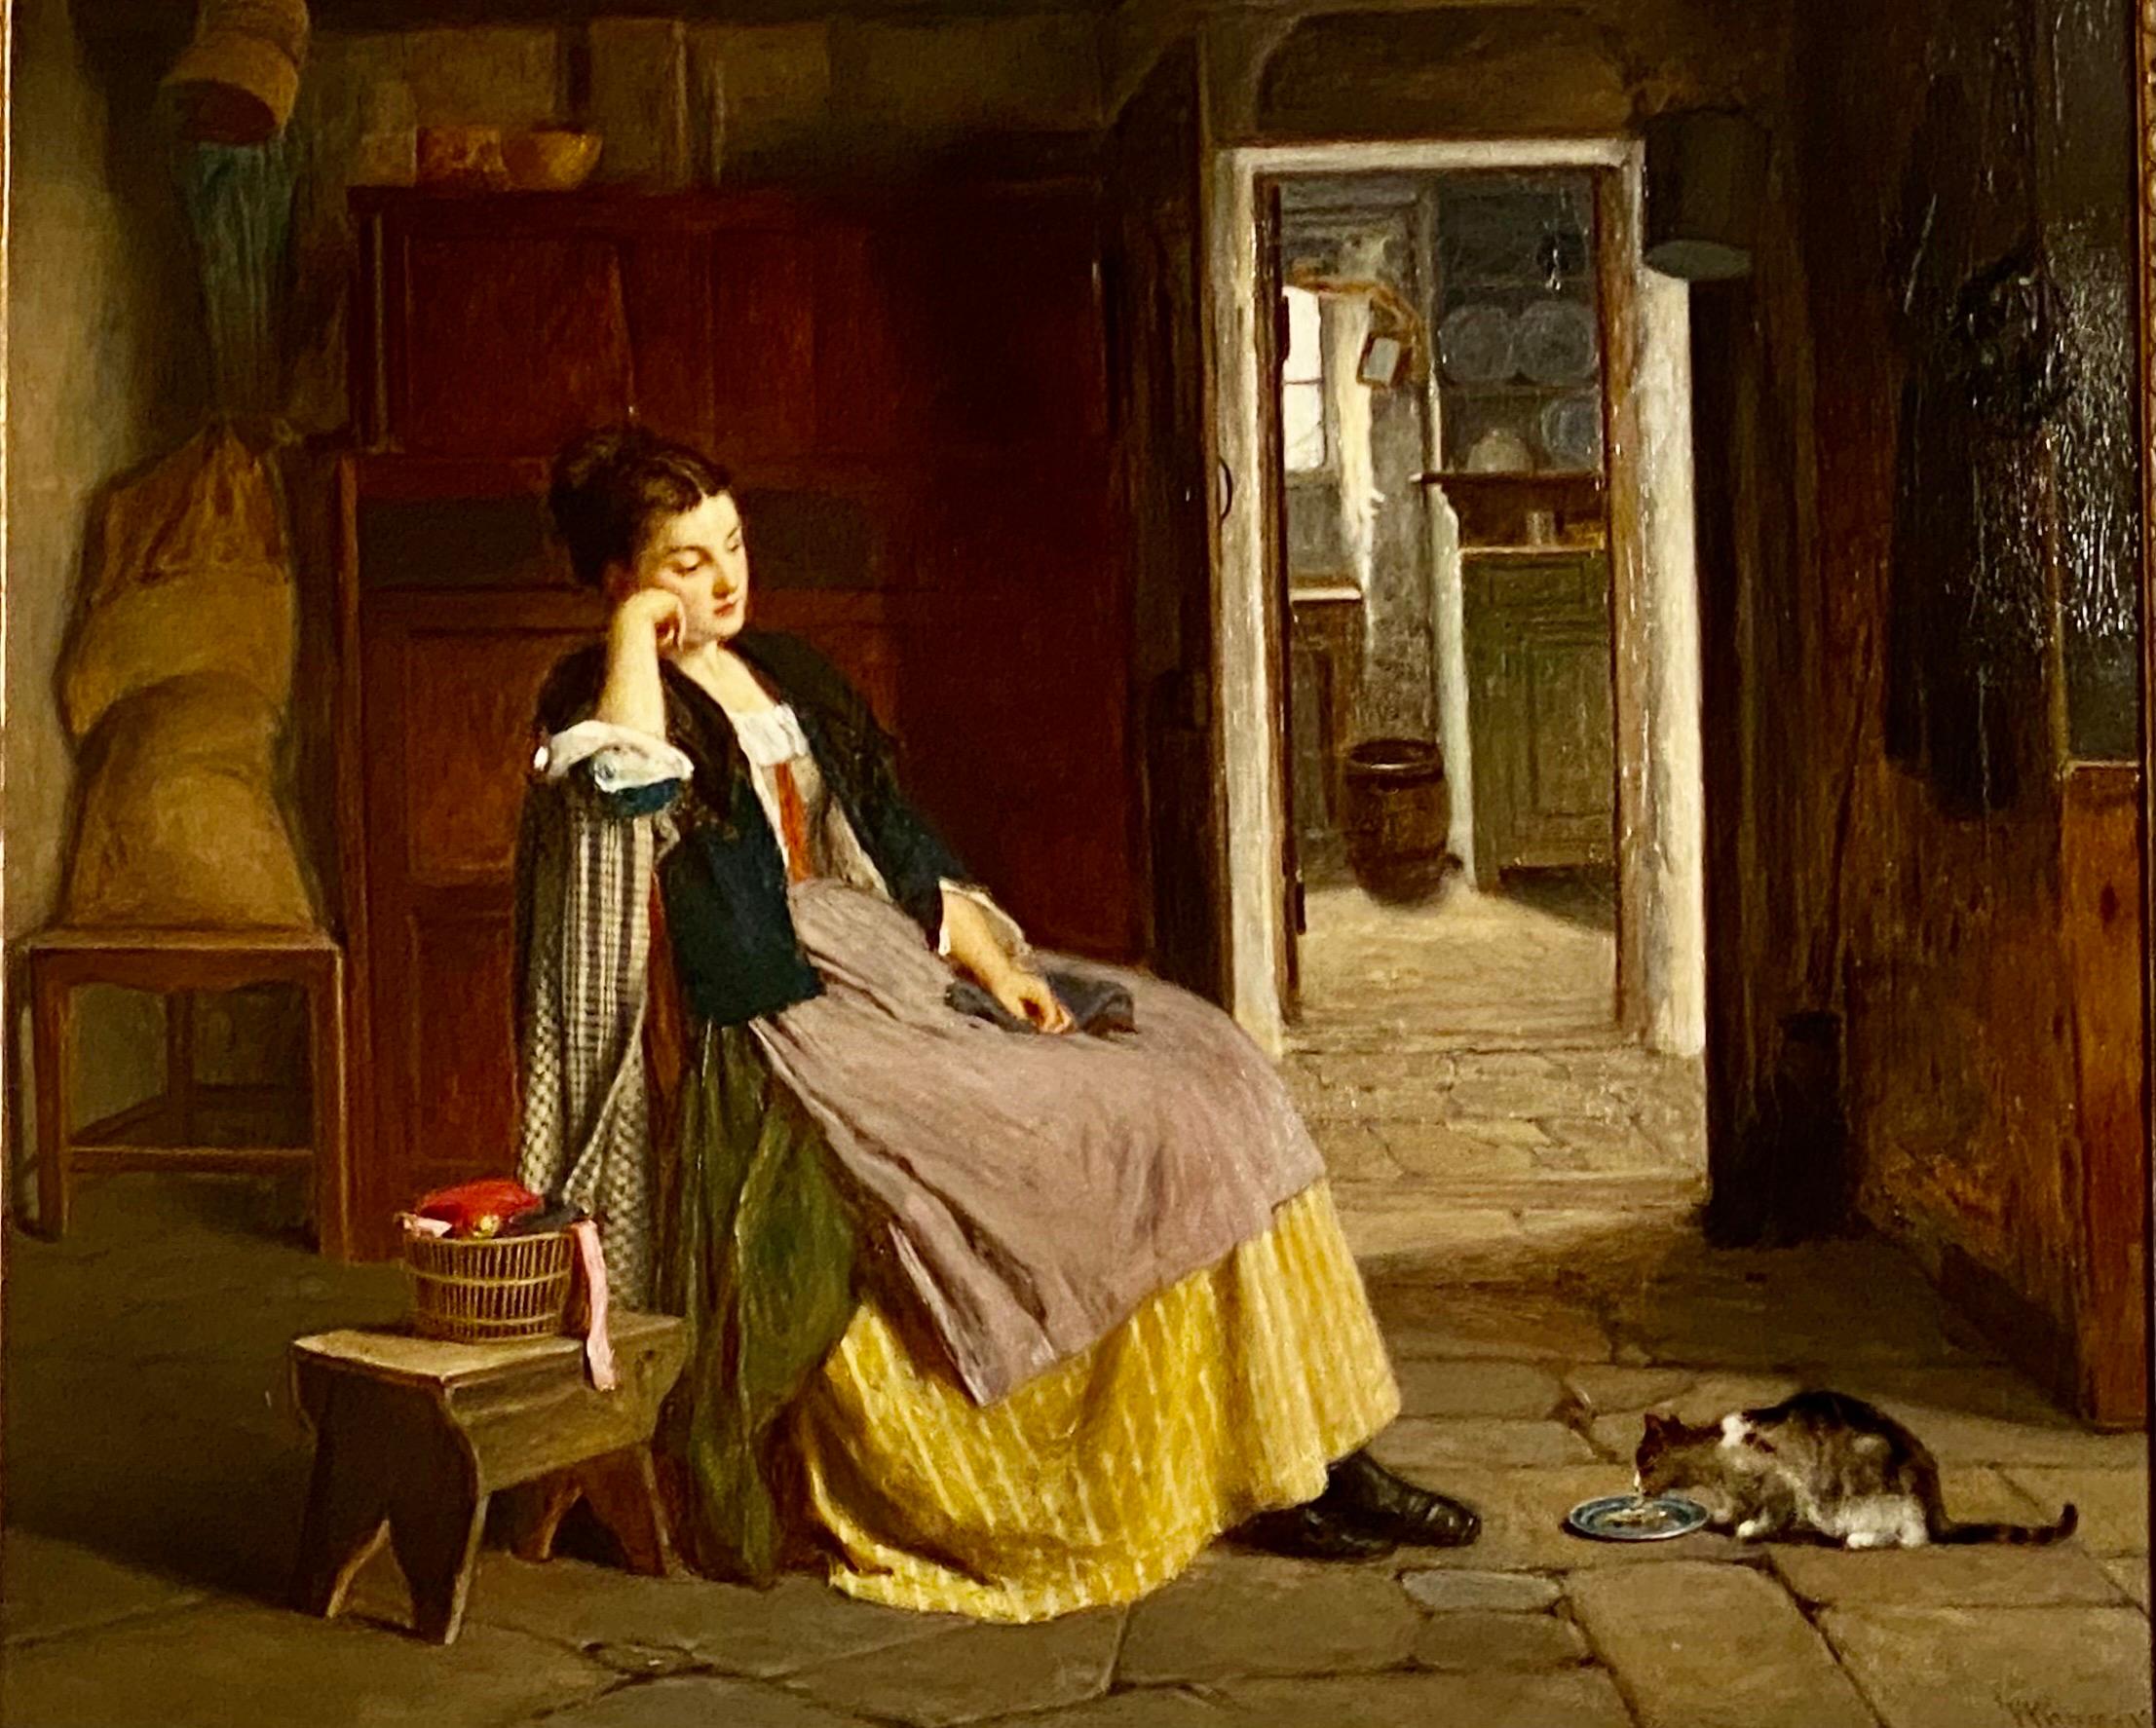 A skilful study of a woman by Victorian genre painter, Haynes King (1831-1904).
King was highly regarded towards the end of the 19th-century for his depictions of everyday working class homes. Paintings such as ‘Morning Gossip’, ‘The Letter Writer’,